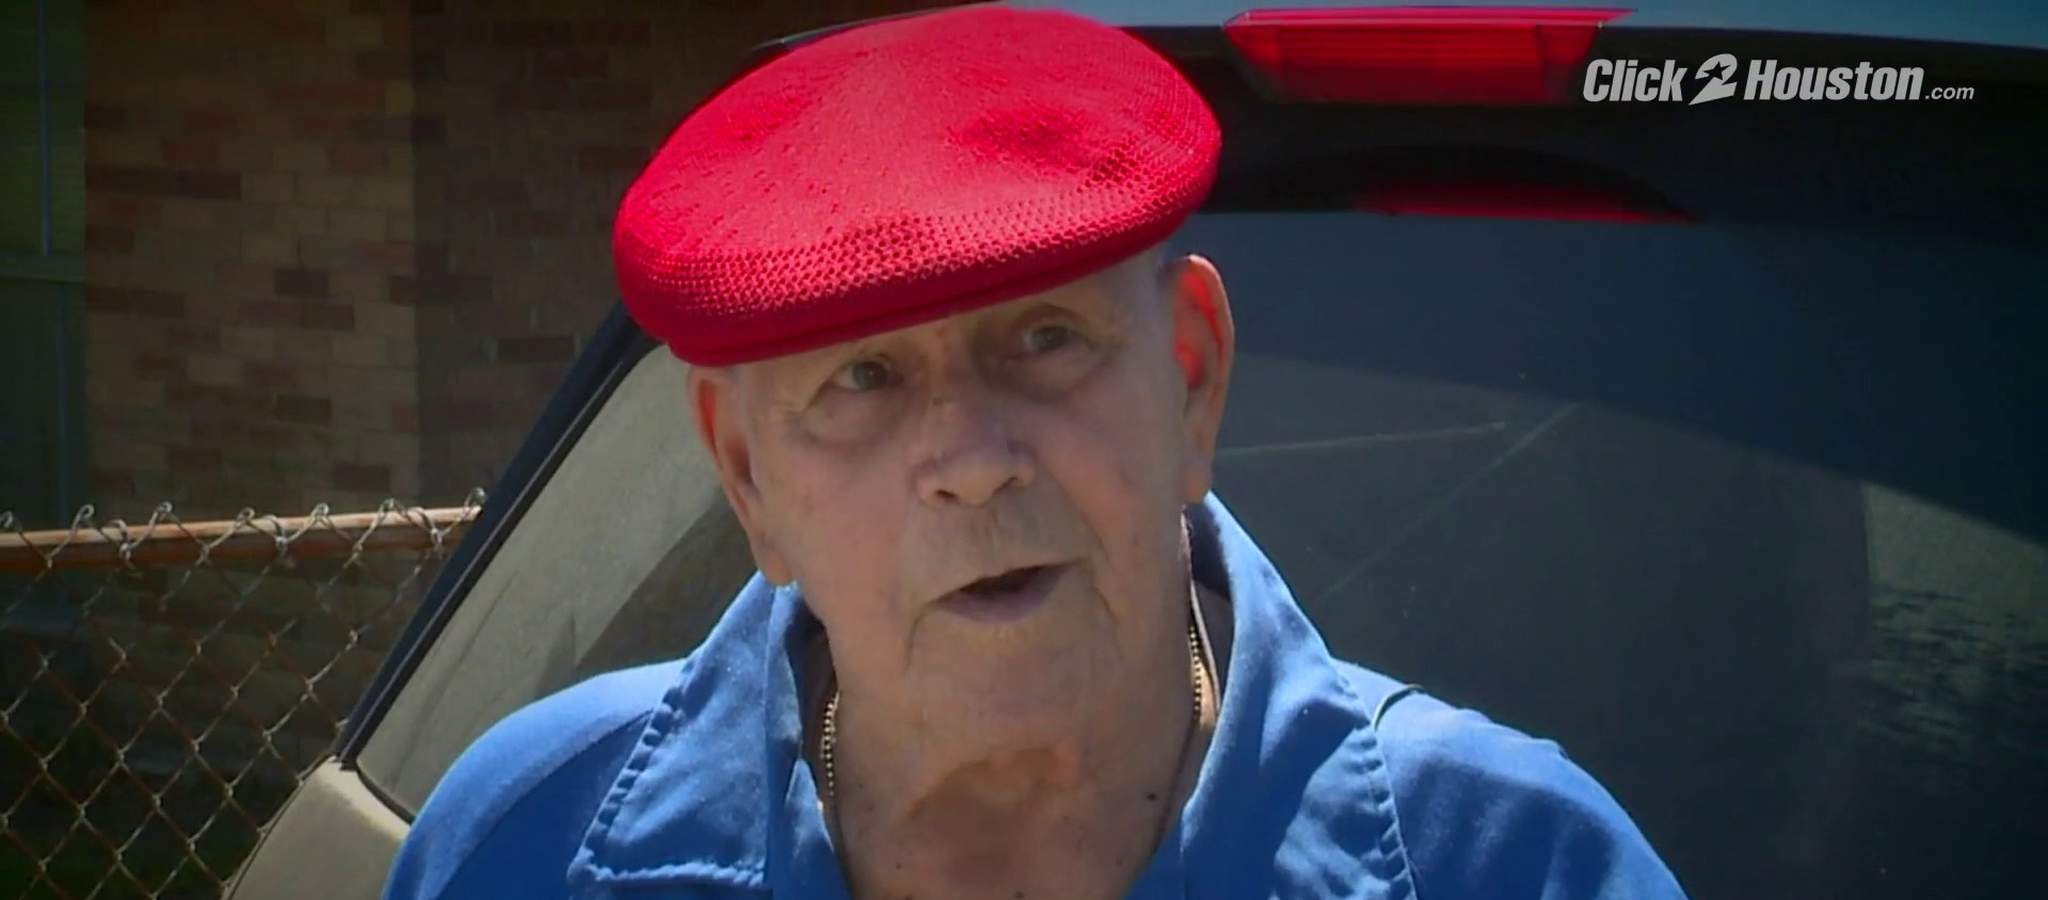 Community raises nearly $4,000 for 94-year-old man who misplaced hundreds of dollars